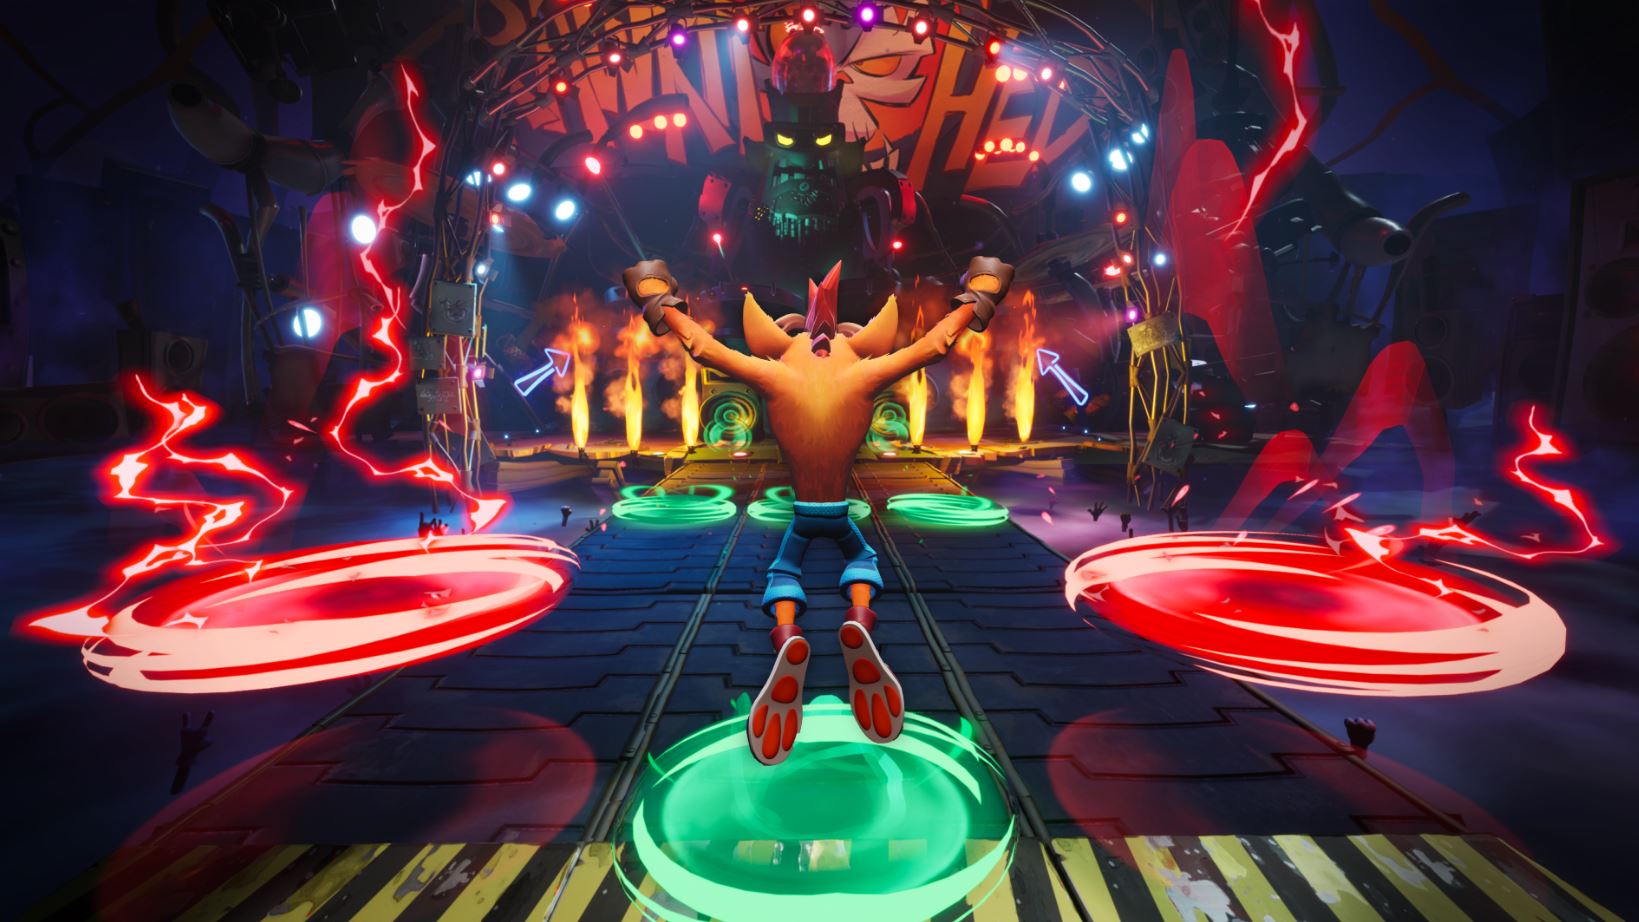 Crash Bandicoot 4: It's About Time Continues To Look Impressive In